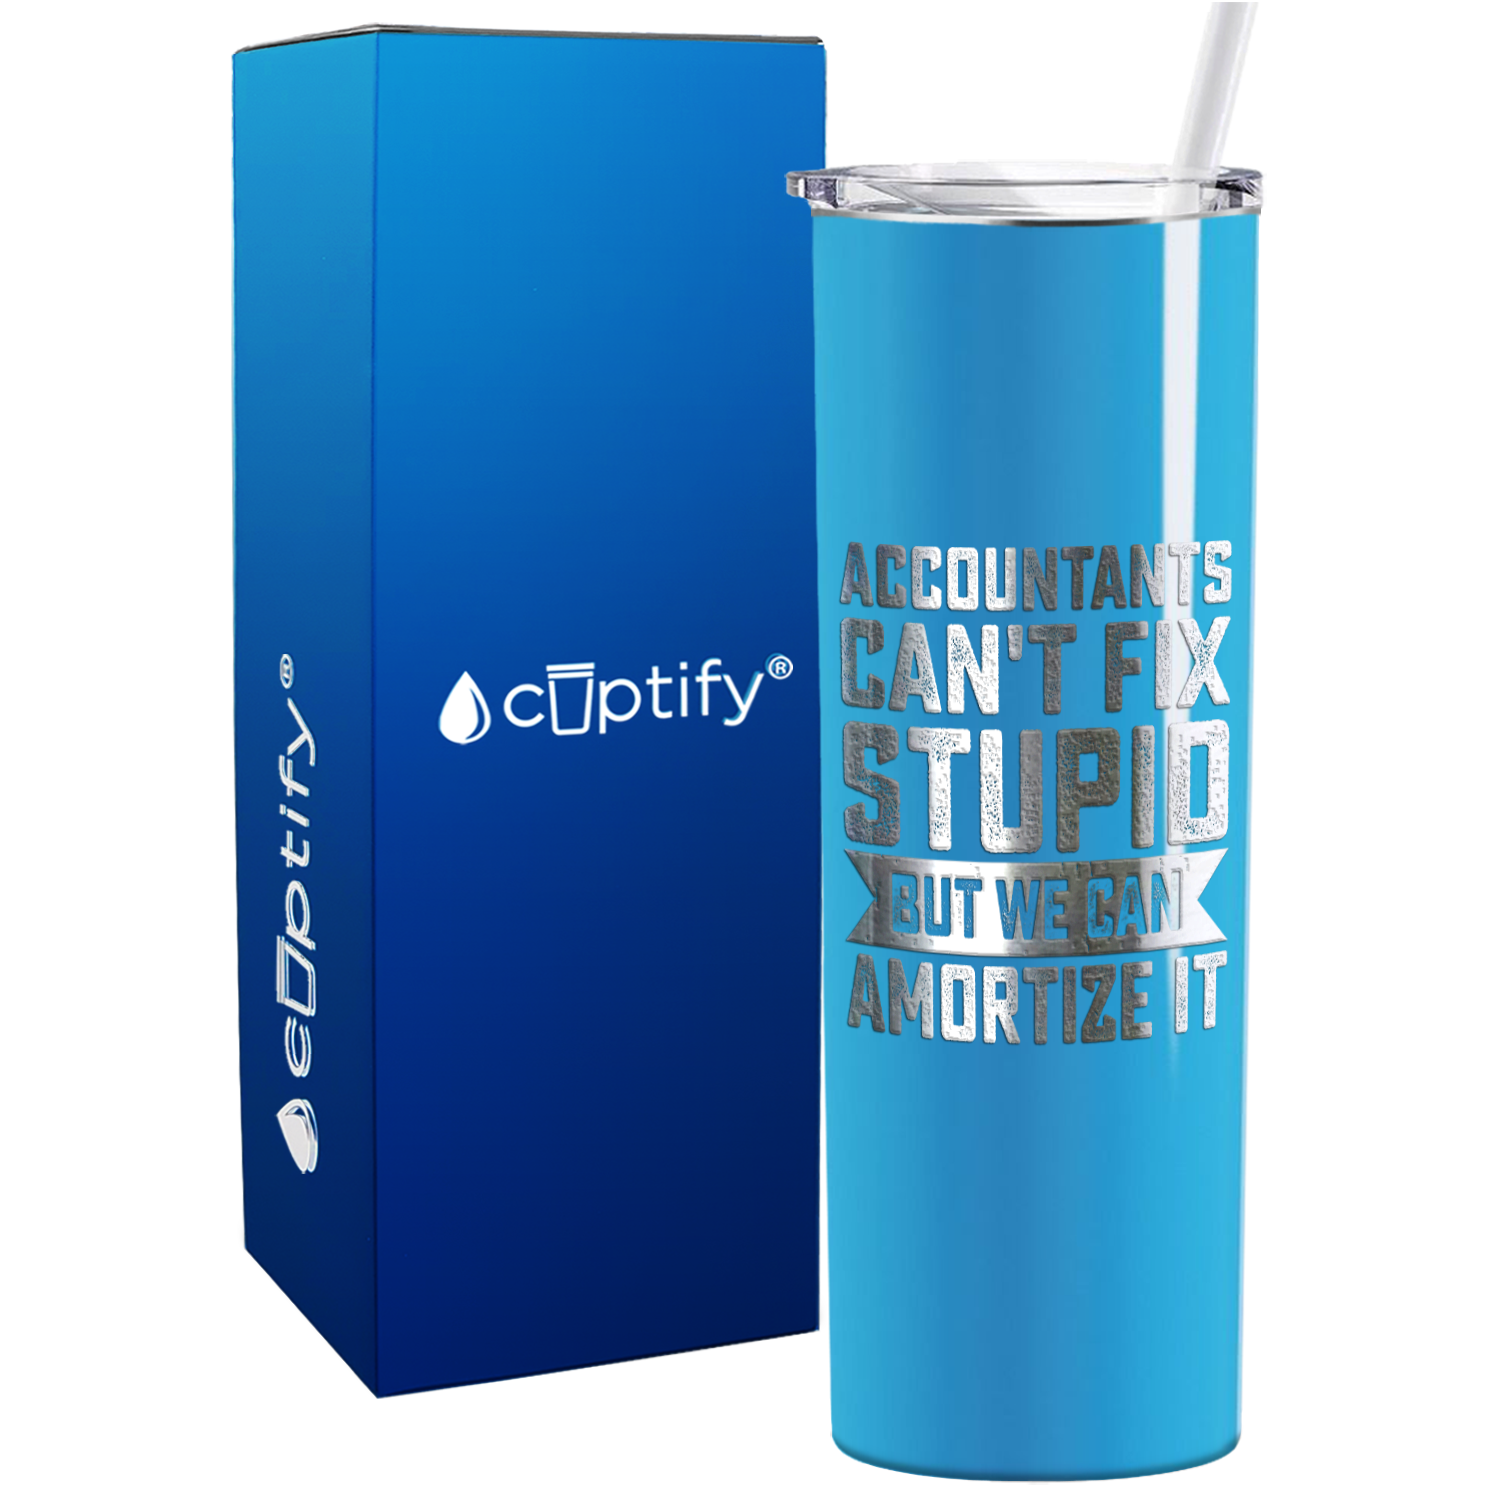 Accountants Cant Fix Stupid but we can Amortize it on 20oz Skinny Stainless Steel Tumbler